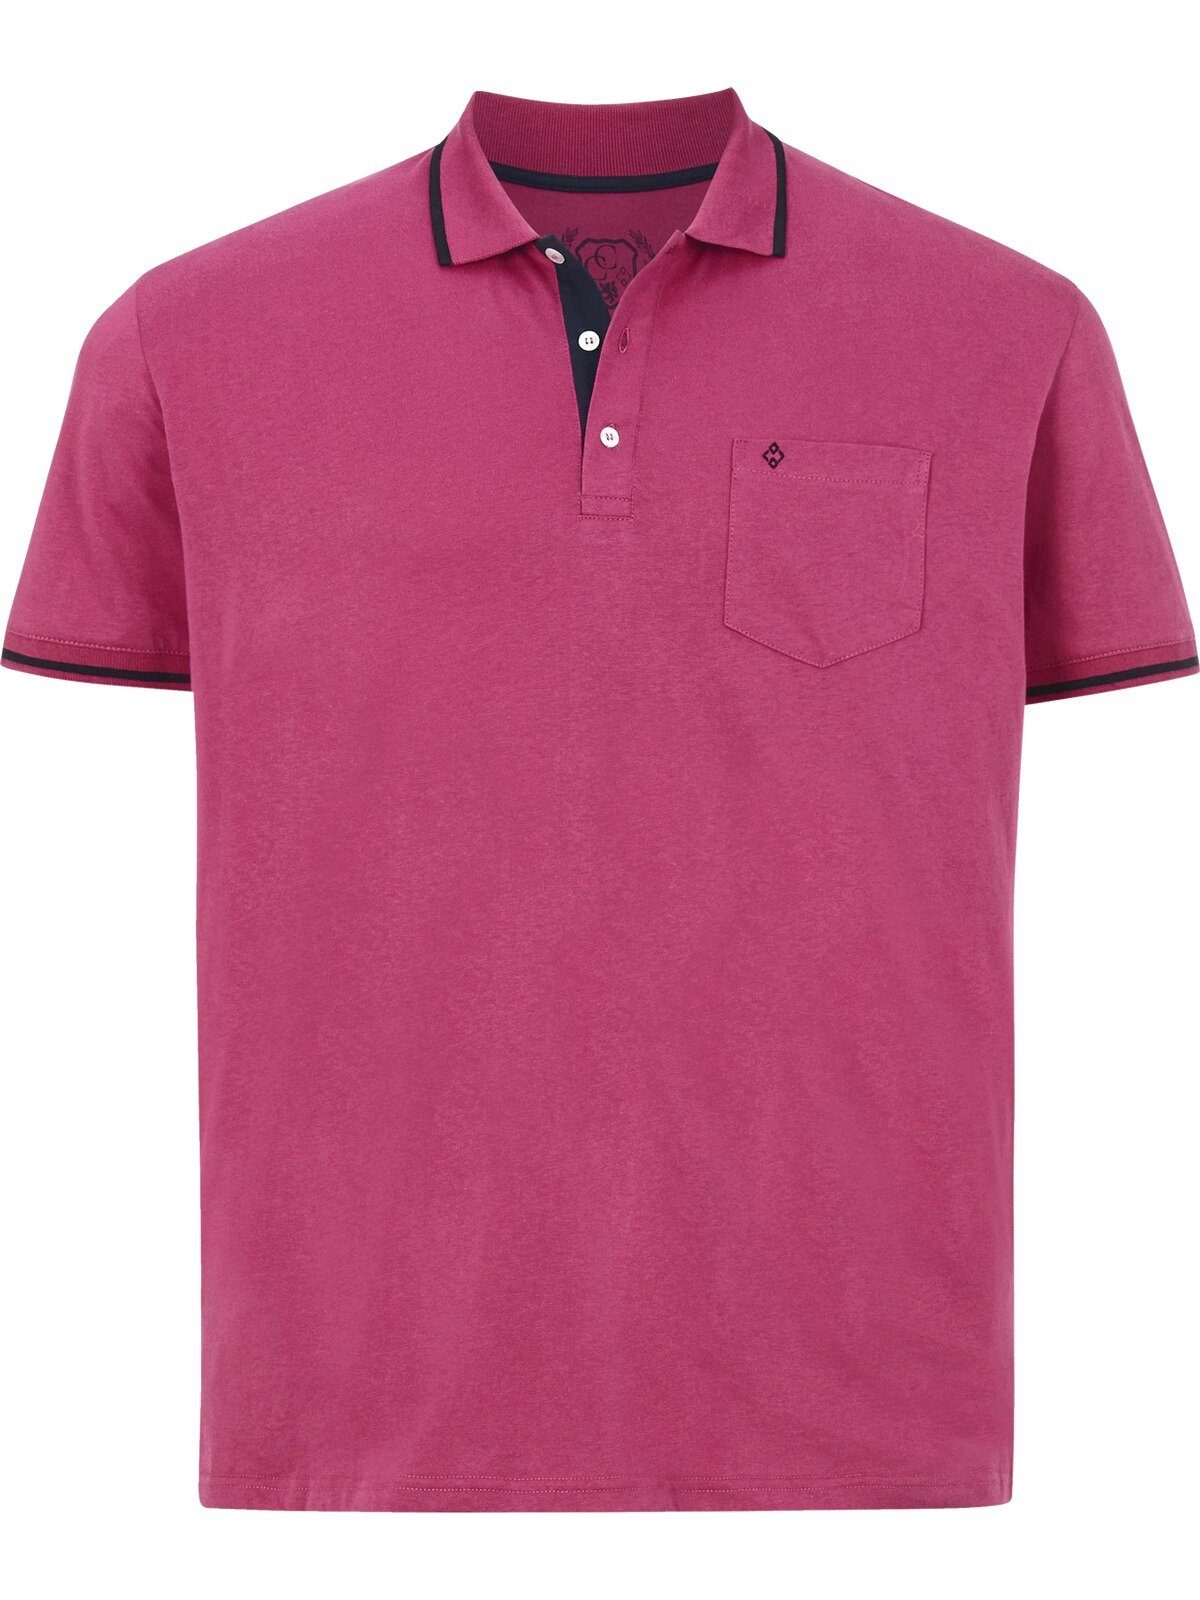 FEN Charles Poloshirt Jersey-Qualität Colby EARL pink bequeme